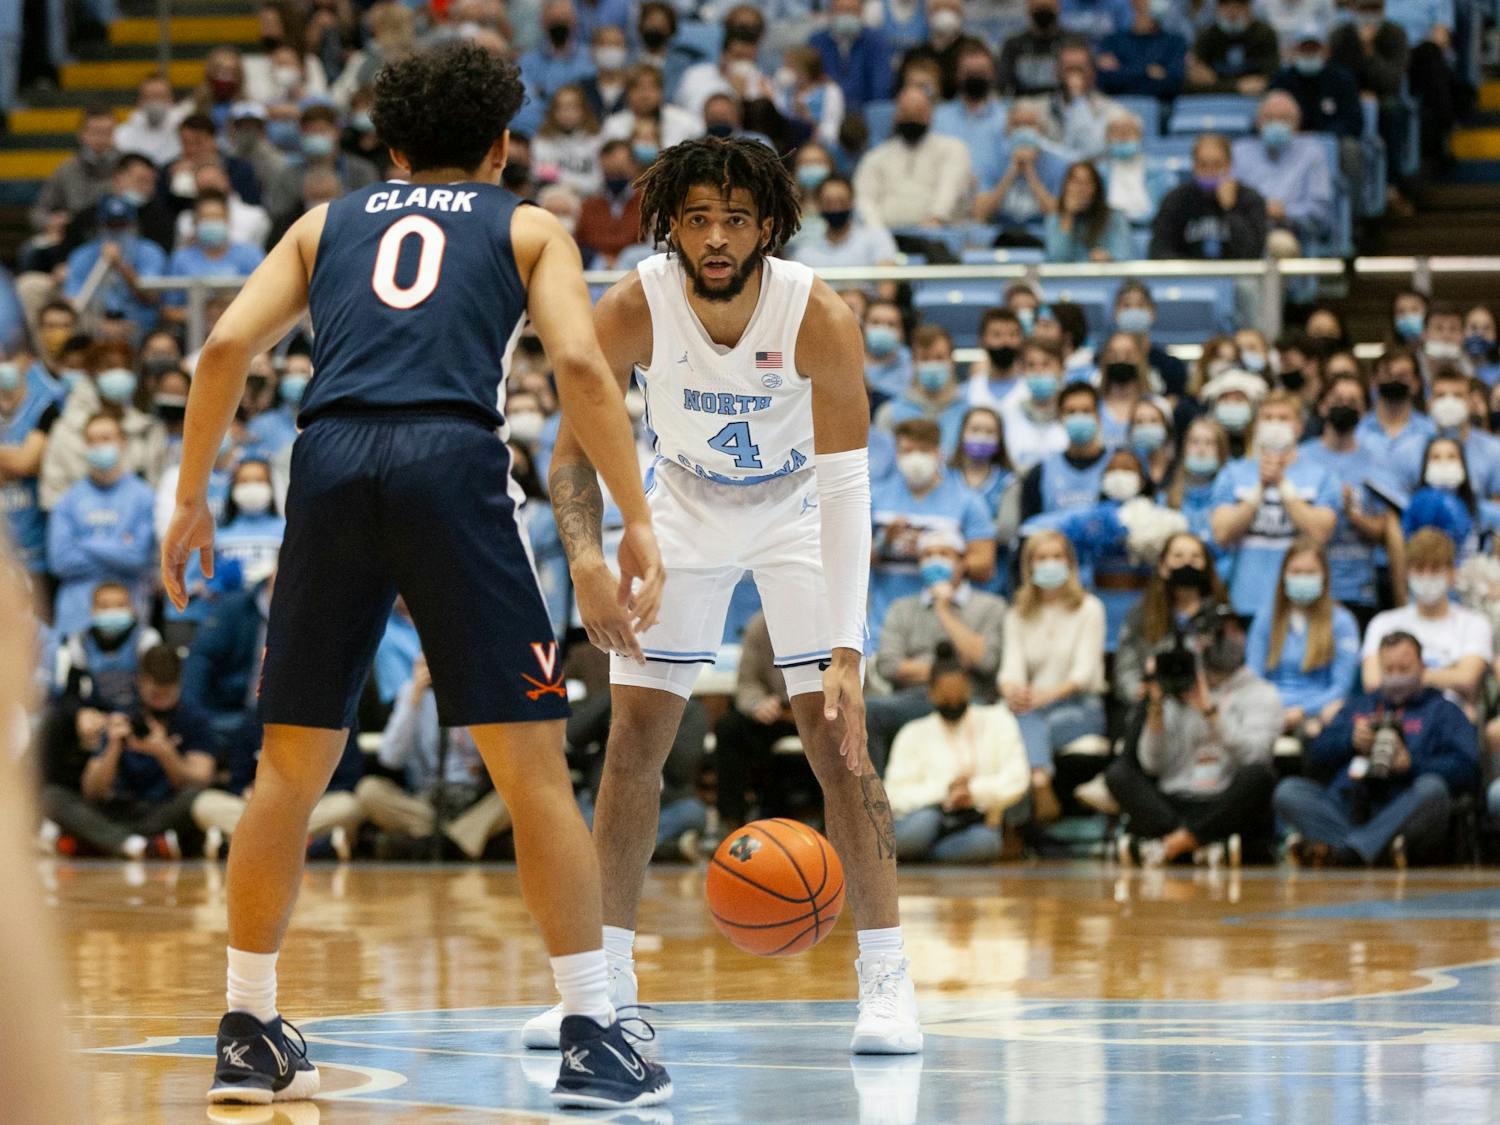 Sophomore guard RJ Davis (4) stares at his opponent at the game against Virginia at the Smith Center in Chapel Hill on Jan. 8, 2022. UNC won 74-58.